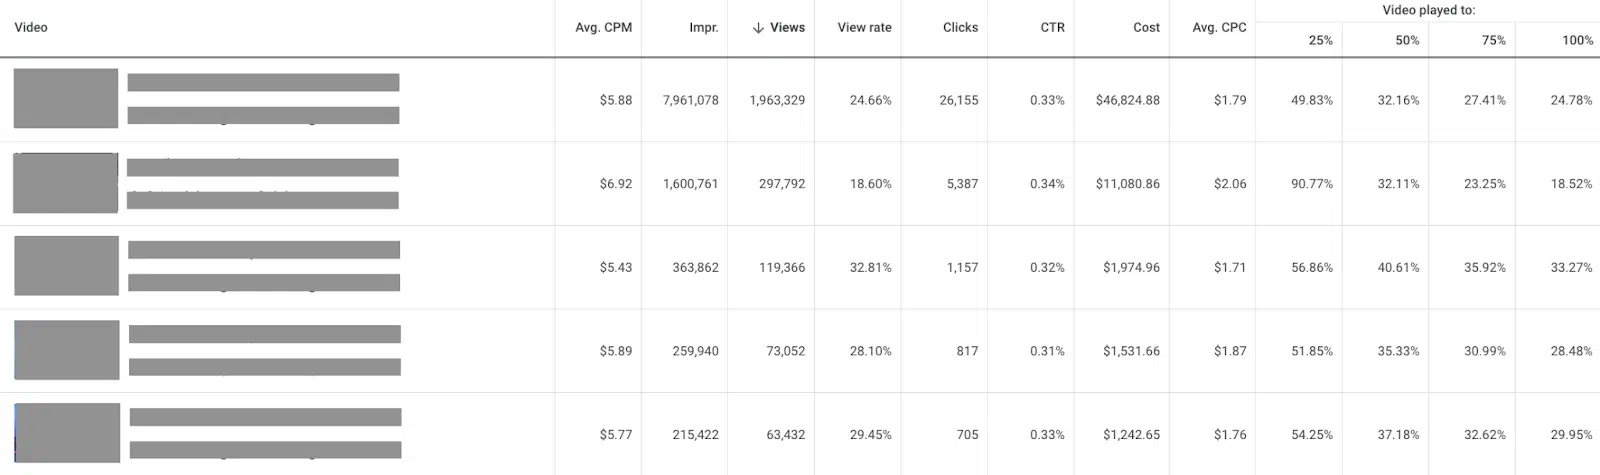 YouTube video campaign analytics